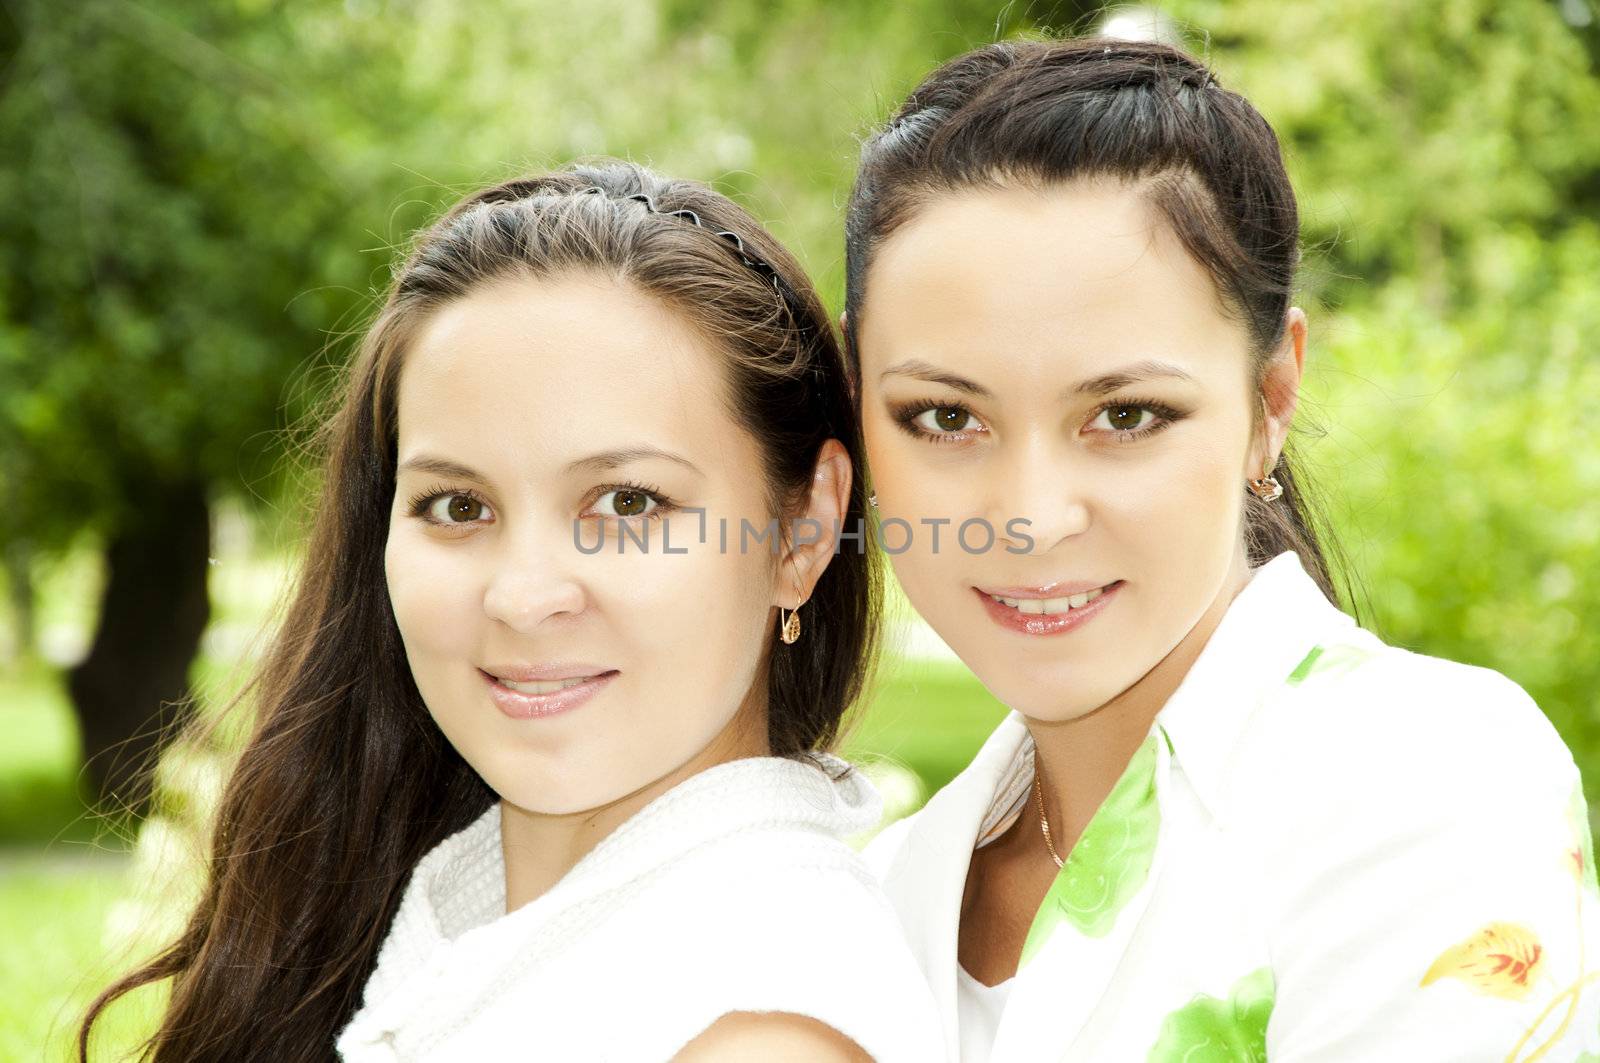 Portrait of two happy young women in a summer garden